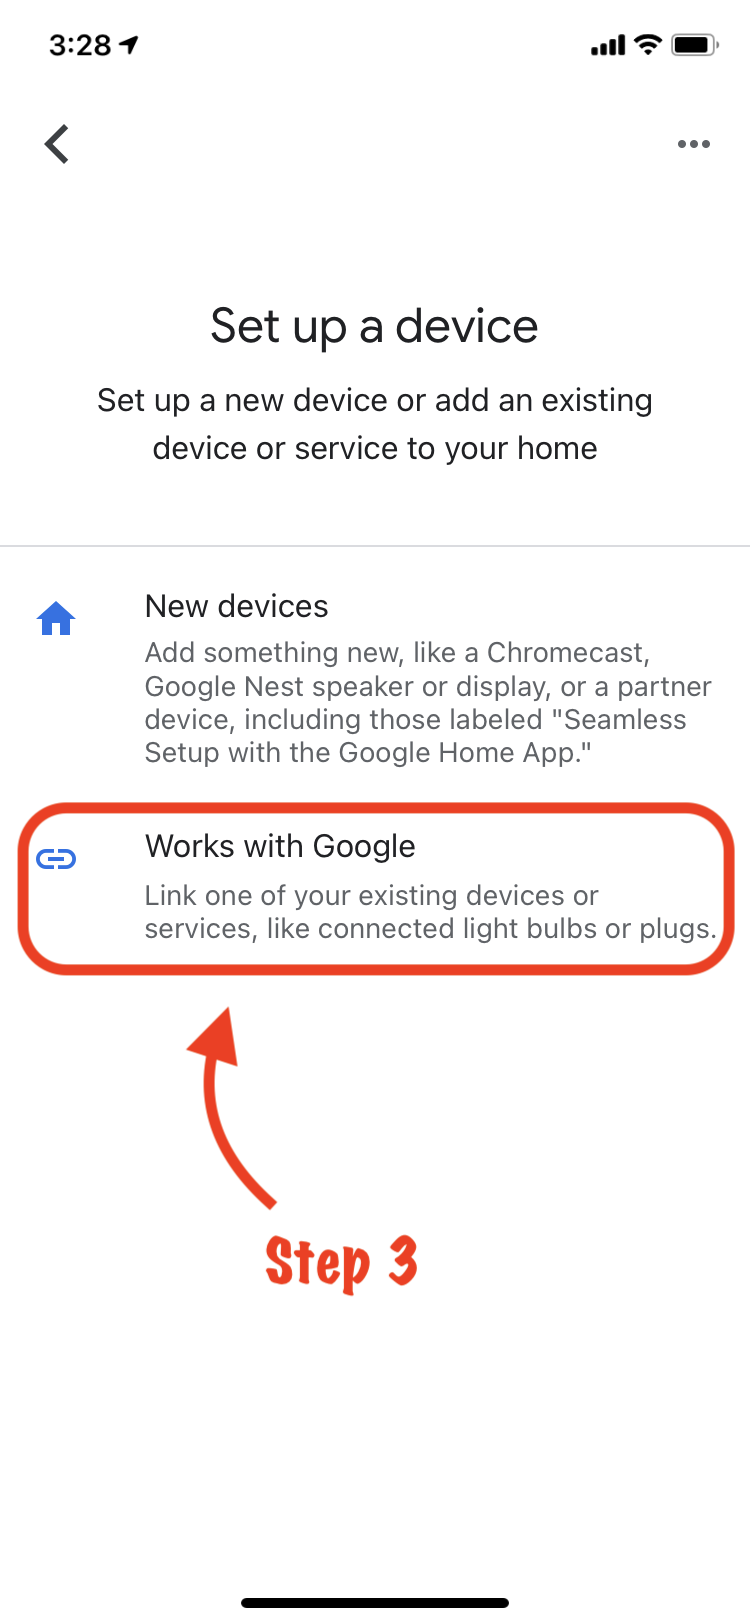 Screenshot of "Works with Google" option in Google Home app